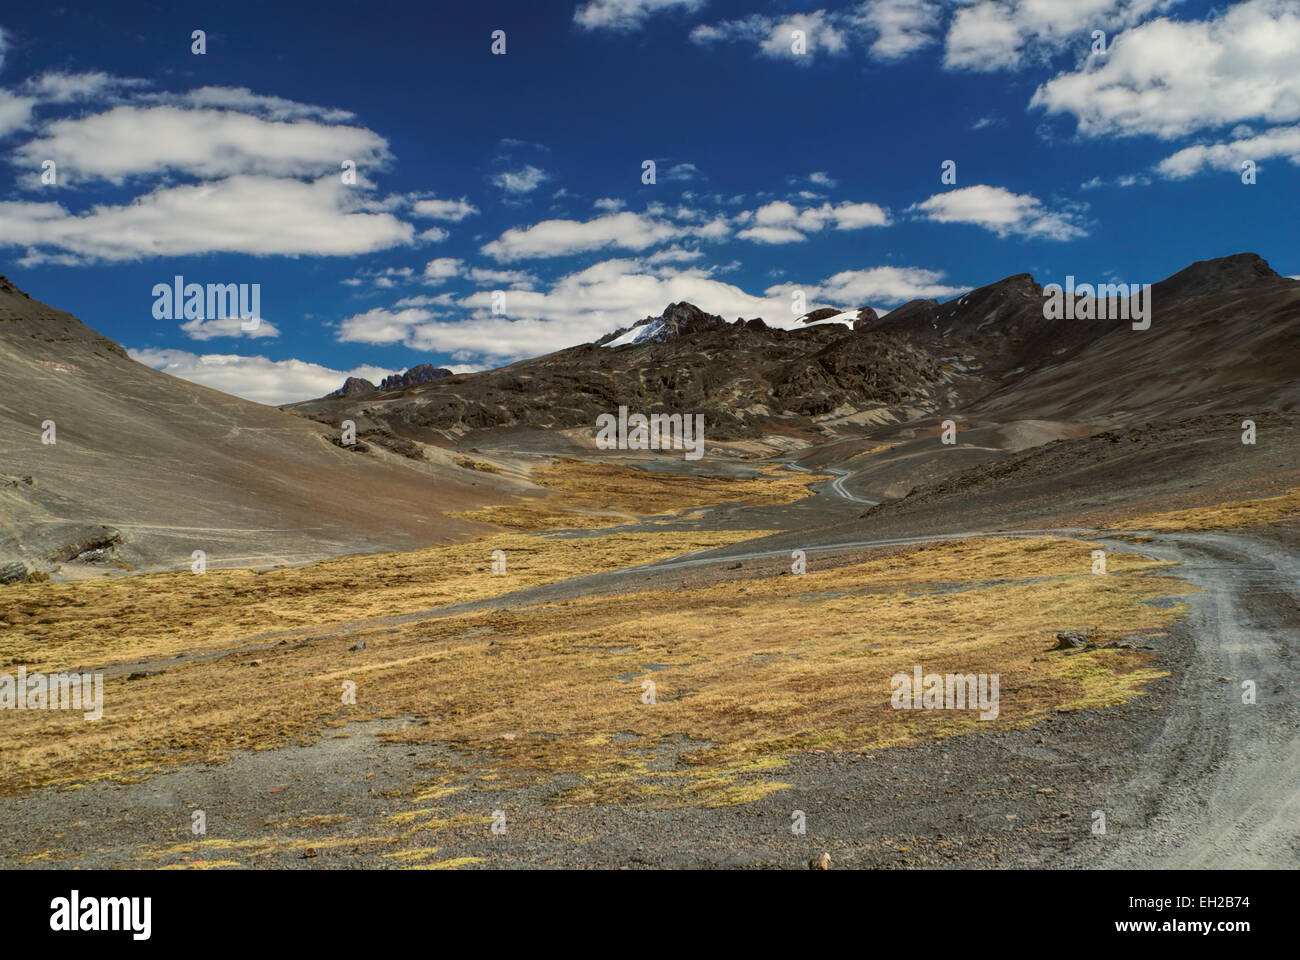 Trail leading into the Andes mountains in Bolivia, Choro trek Stock Photo